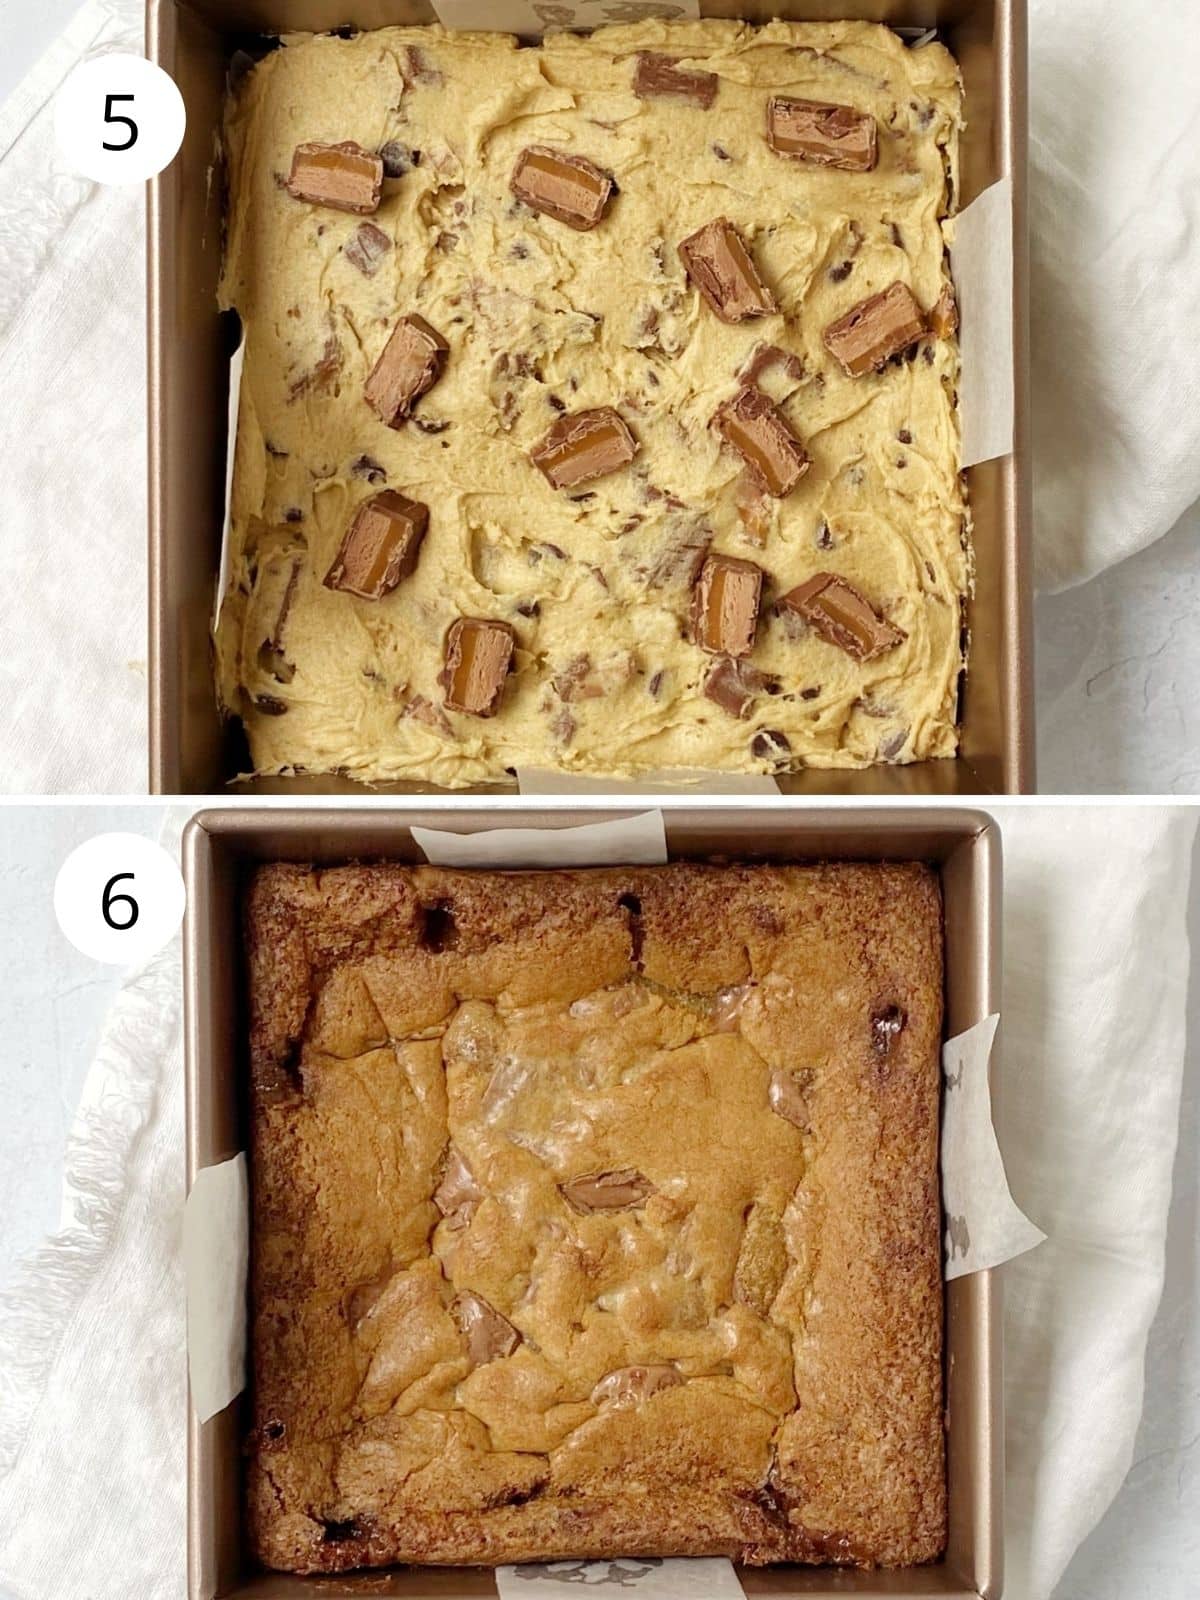 milky way blondie dough in pan before and after baking